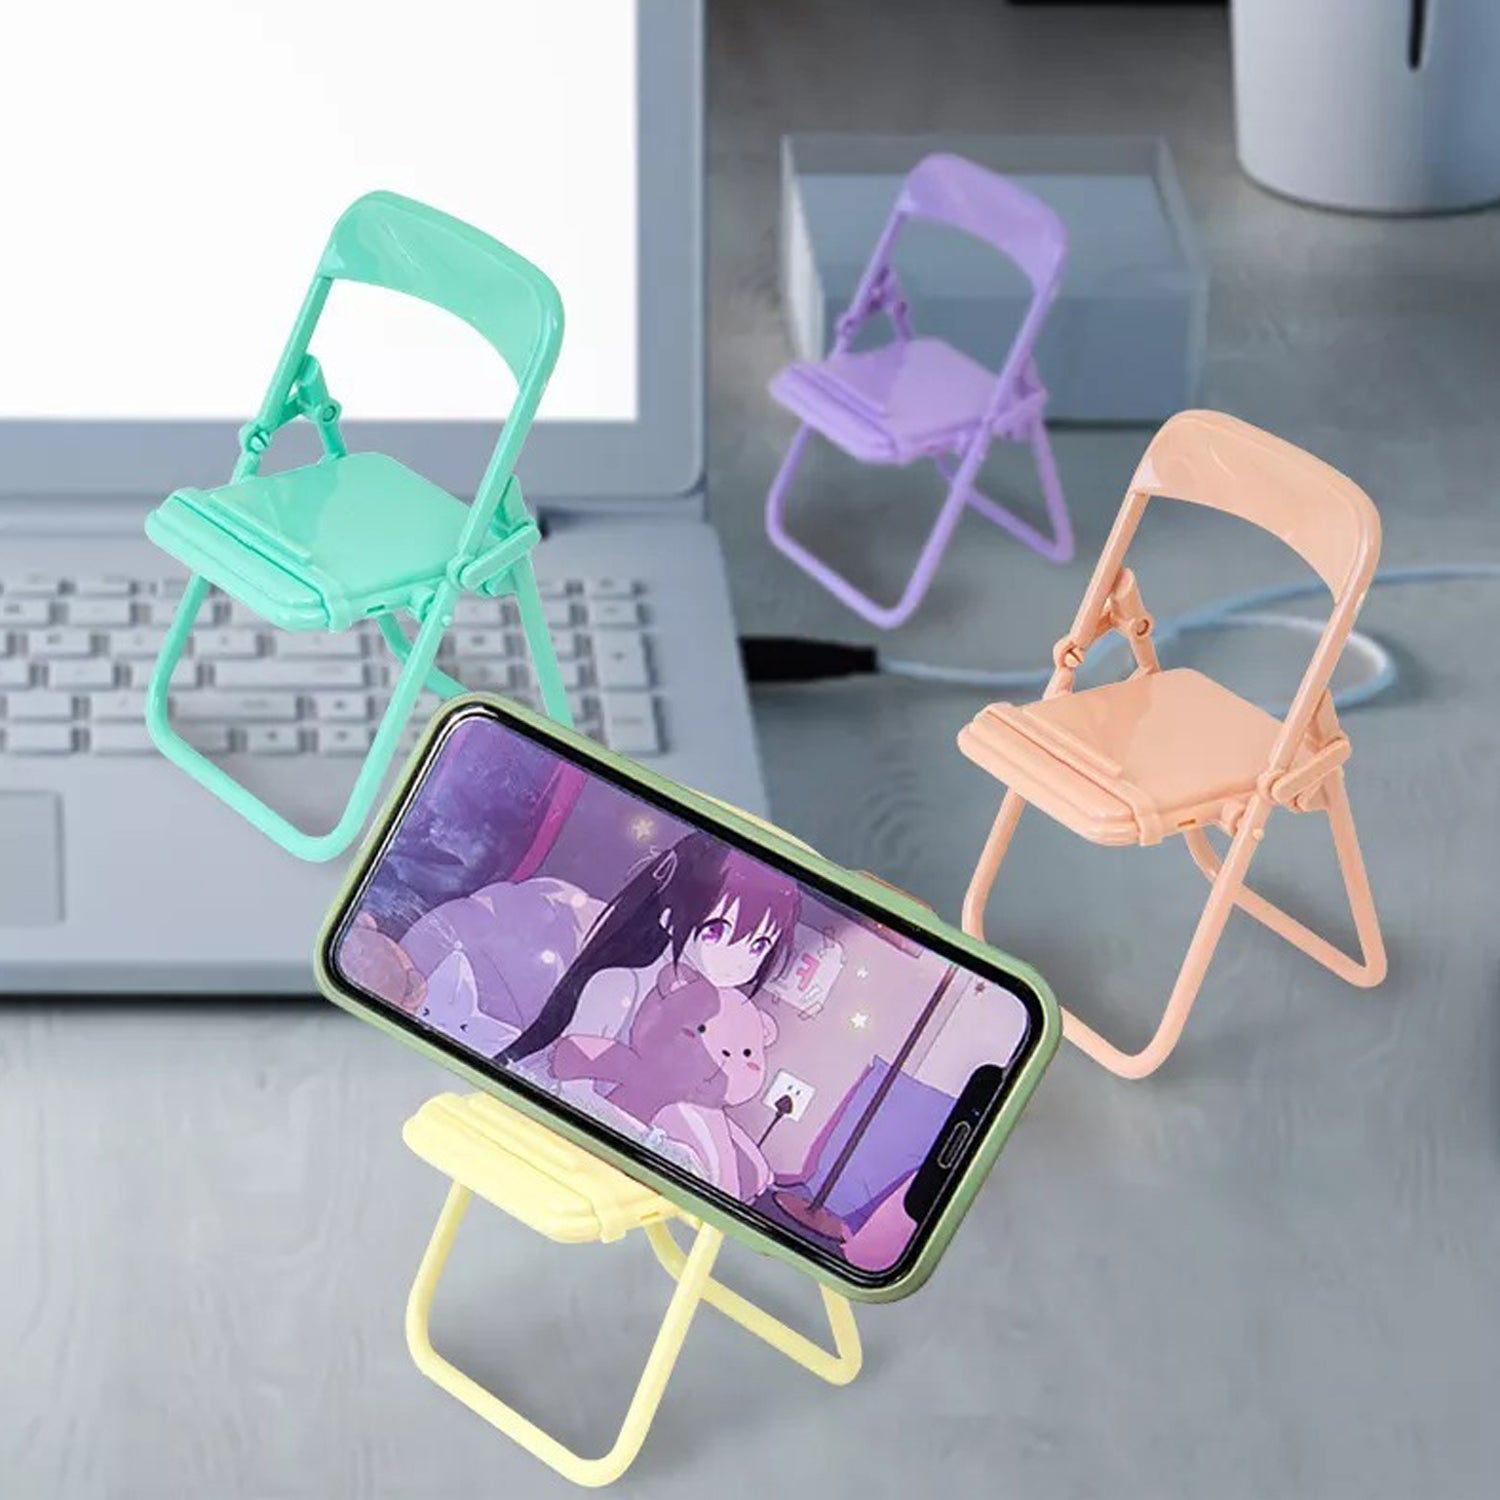 4797A Chair Mobile Stand  for mobiles and smartphones etc.